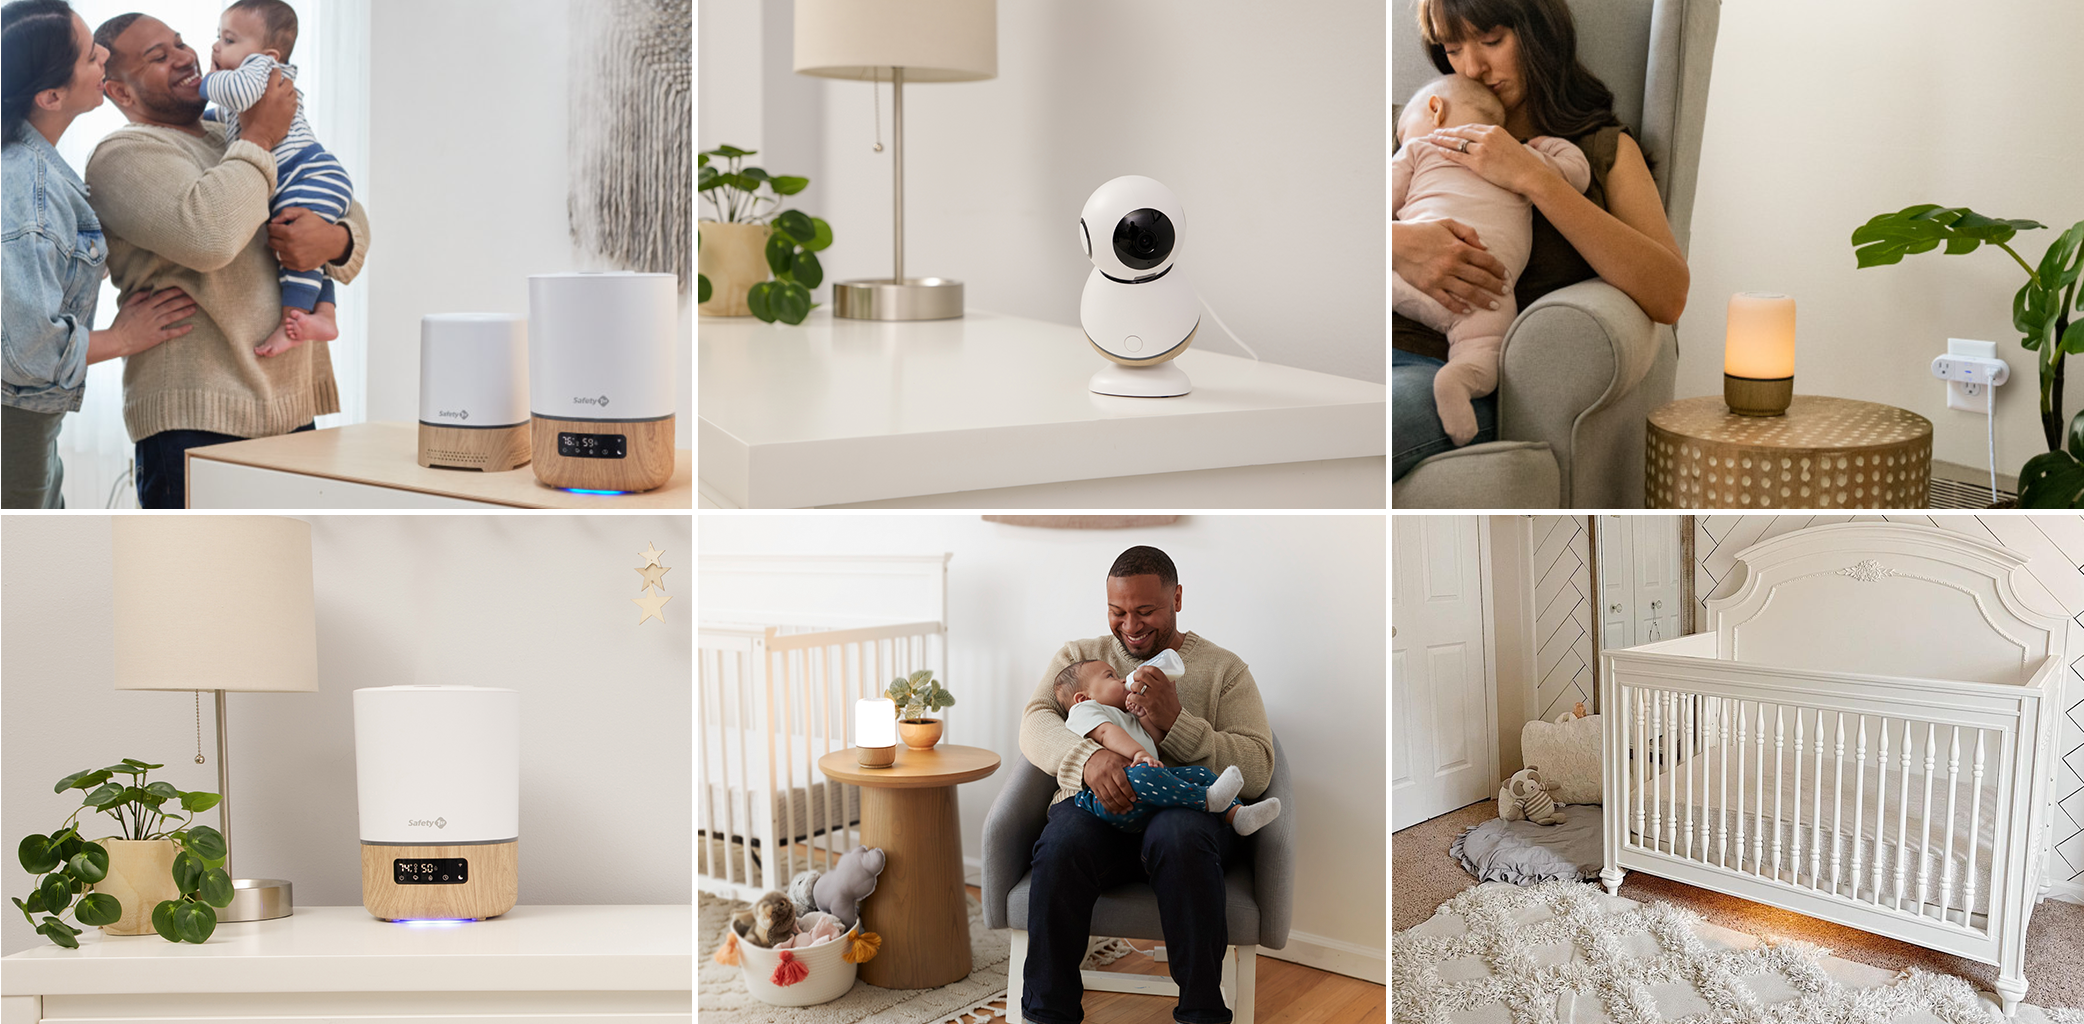 Collage showing 6 images of different Connected Nursery Products with father, mother, and baby